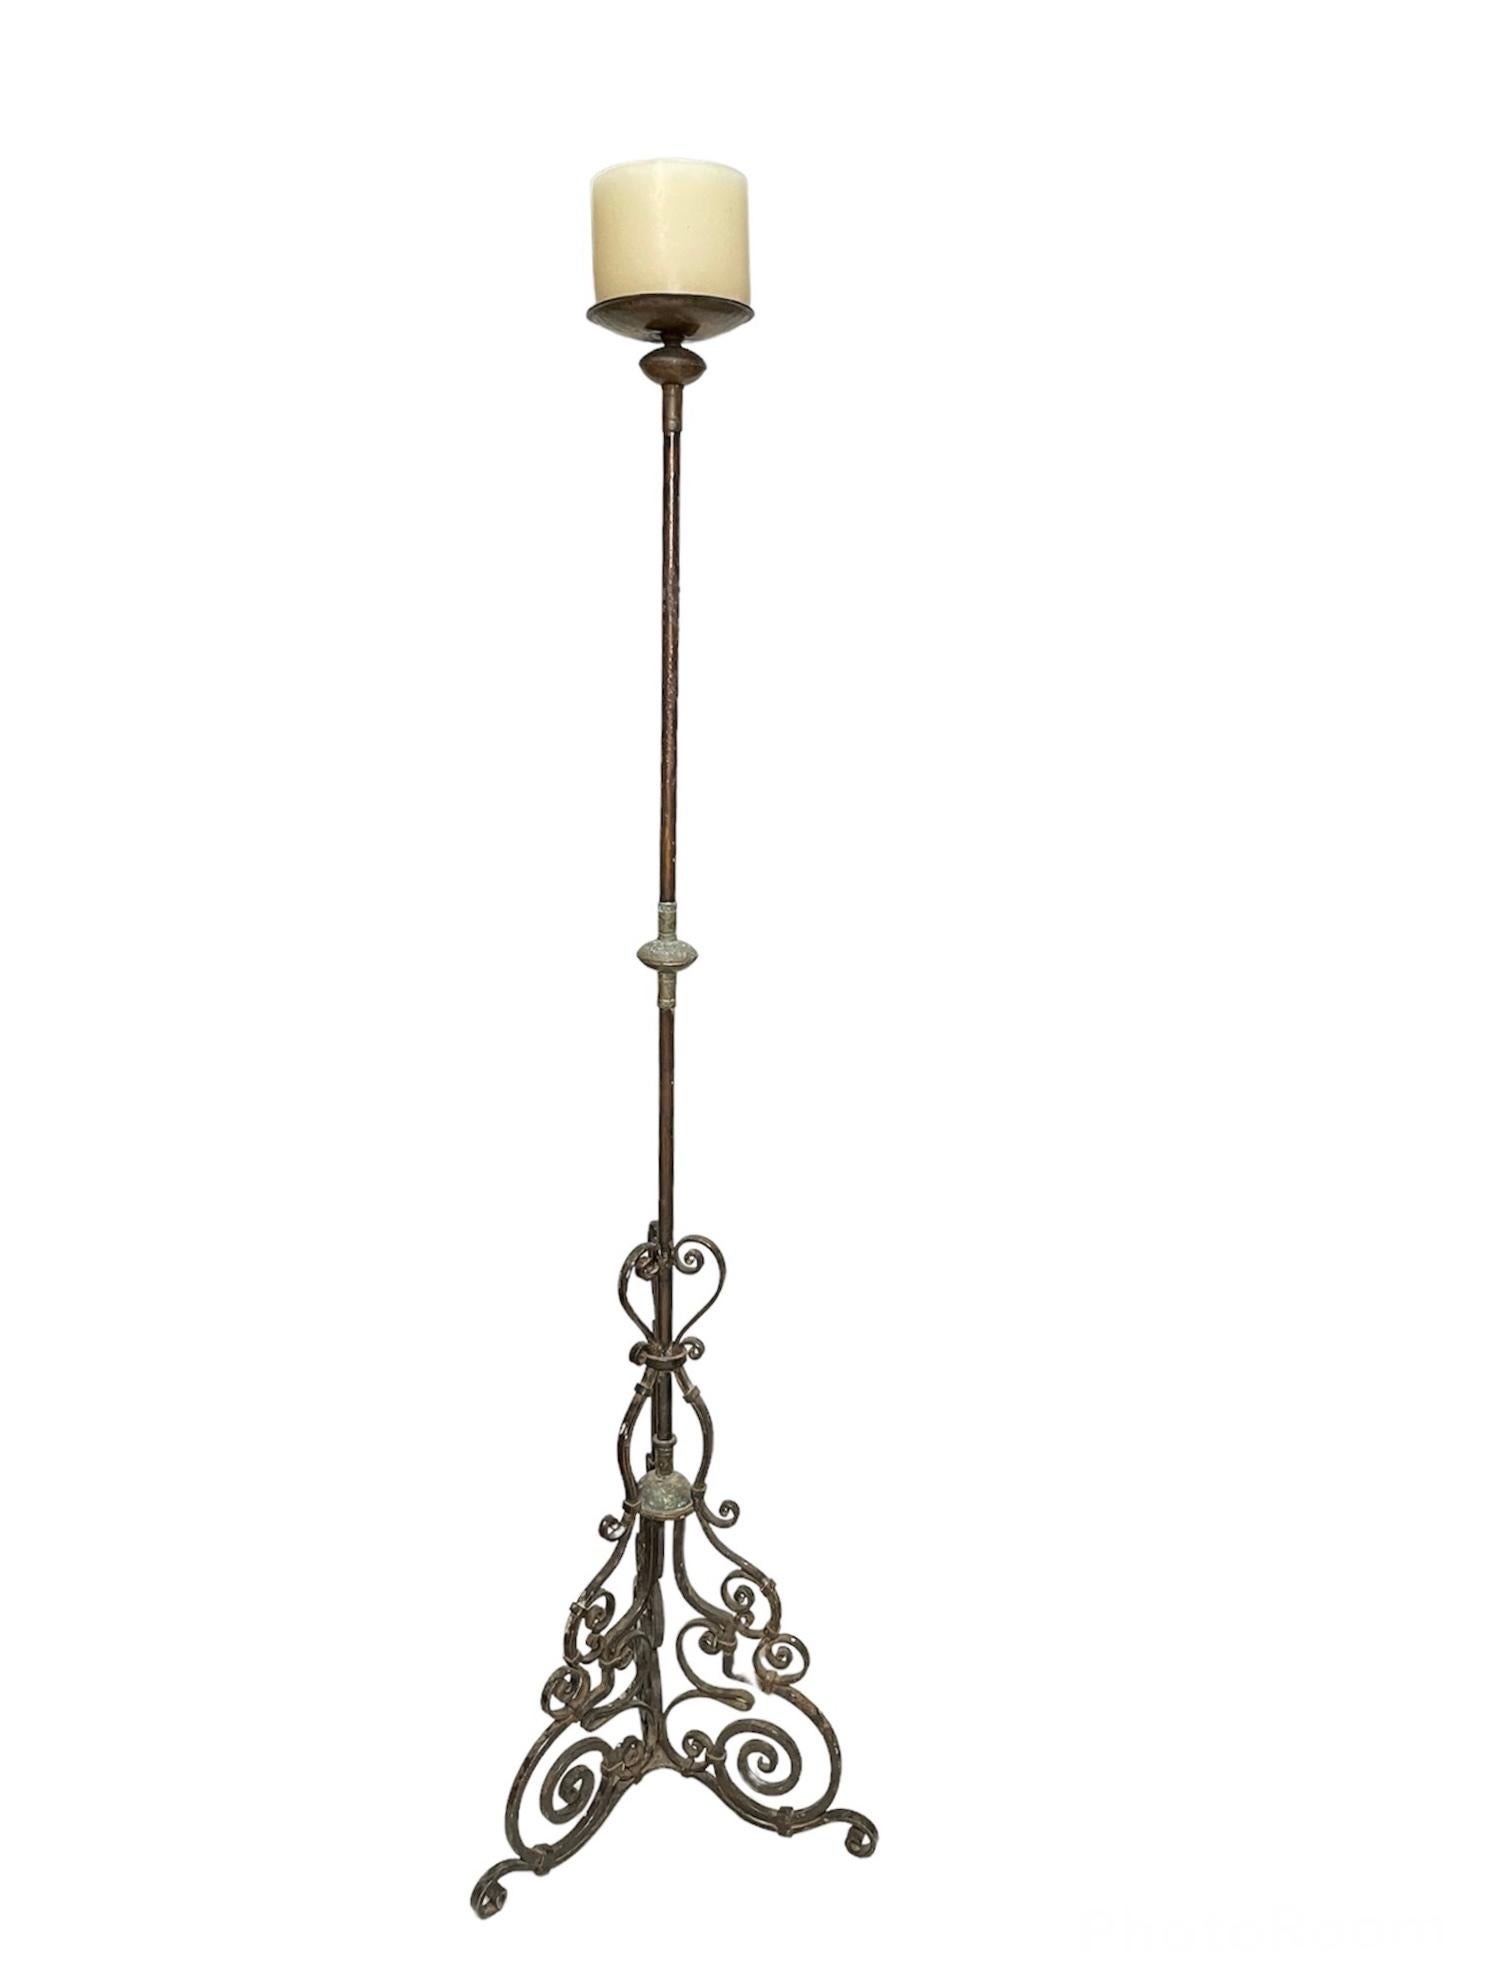 Gothic Style Wrought Iron Candle holder/Torchere For Sale 6